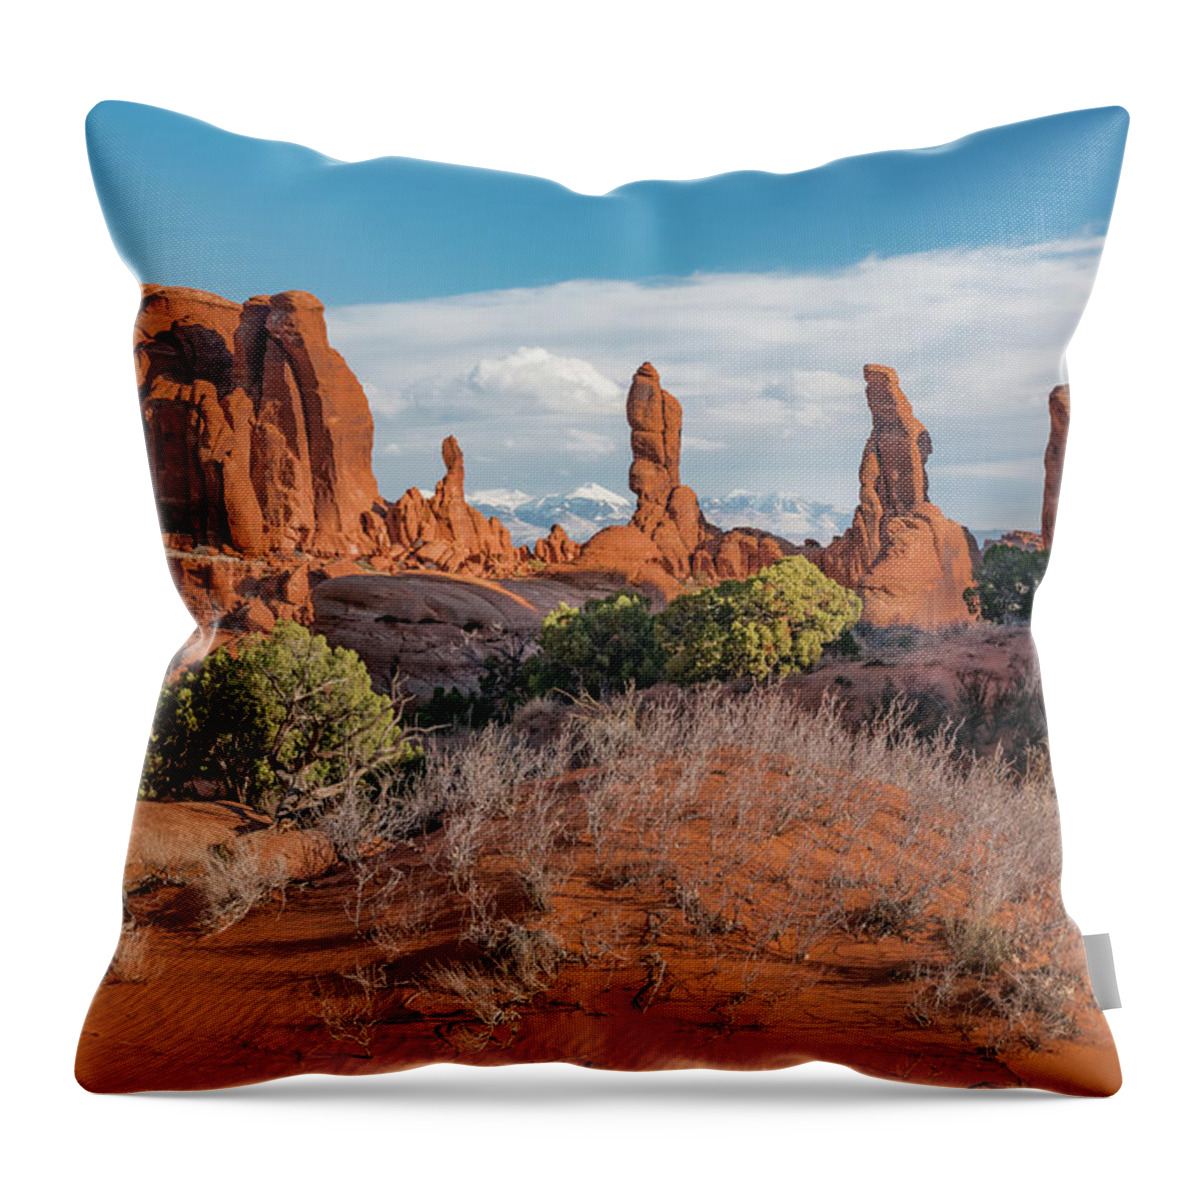 Jeff Foott Throw Pillow featuring the photograph Marching Men Formations by Jeff Foott